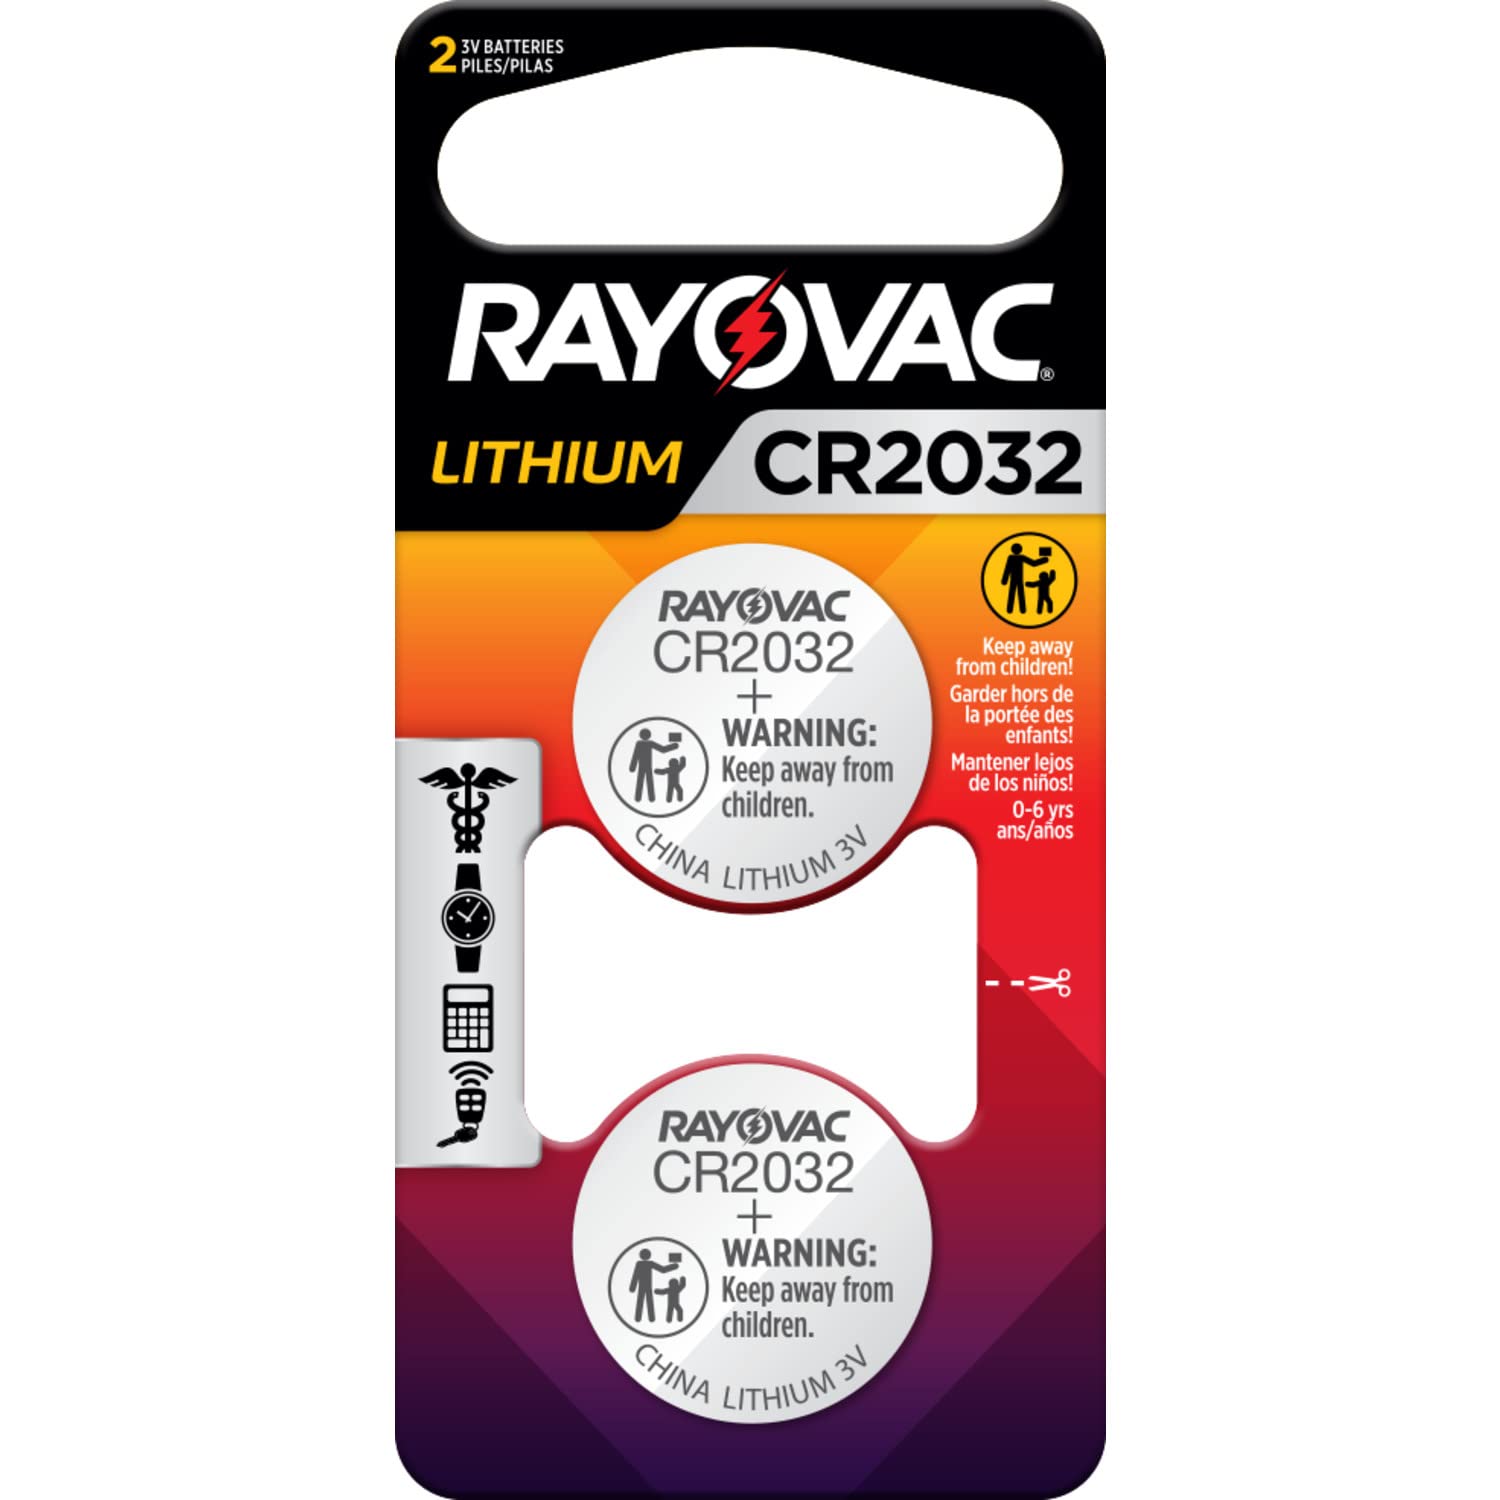 Rayovac CR2032 3V Batteries, 3 Volt Battery Lithium Coin, 2 Count